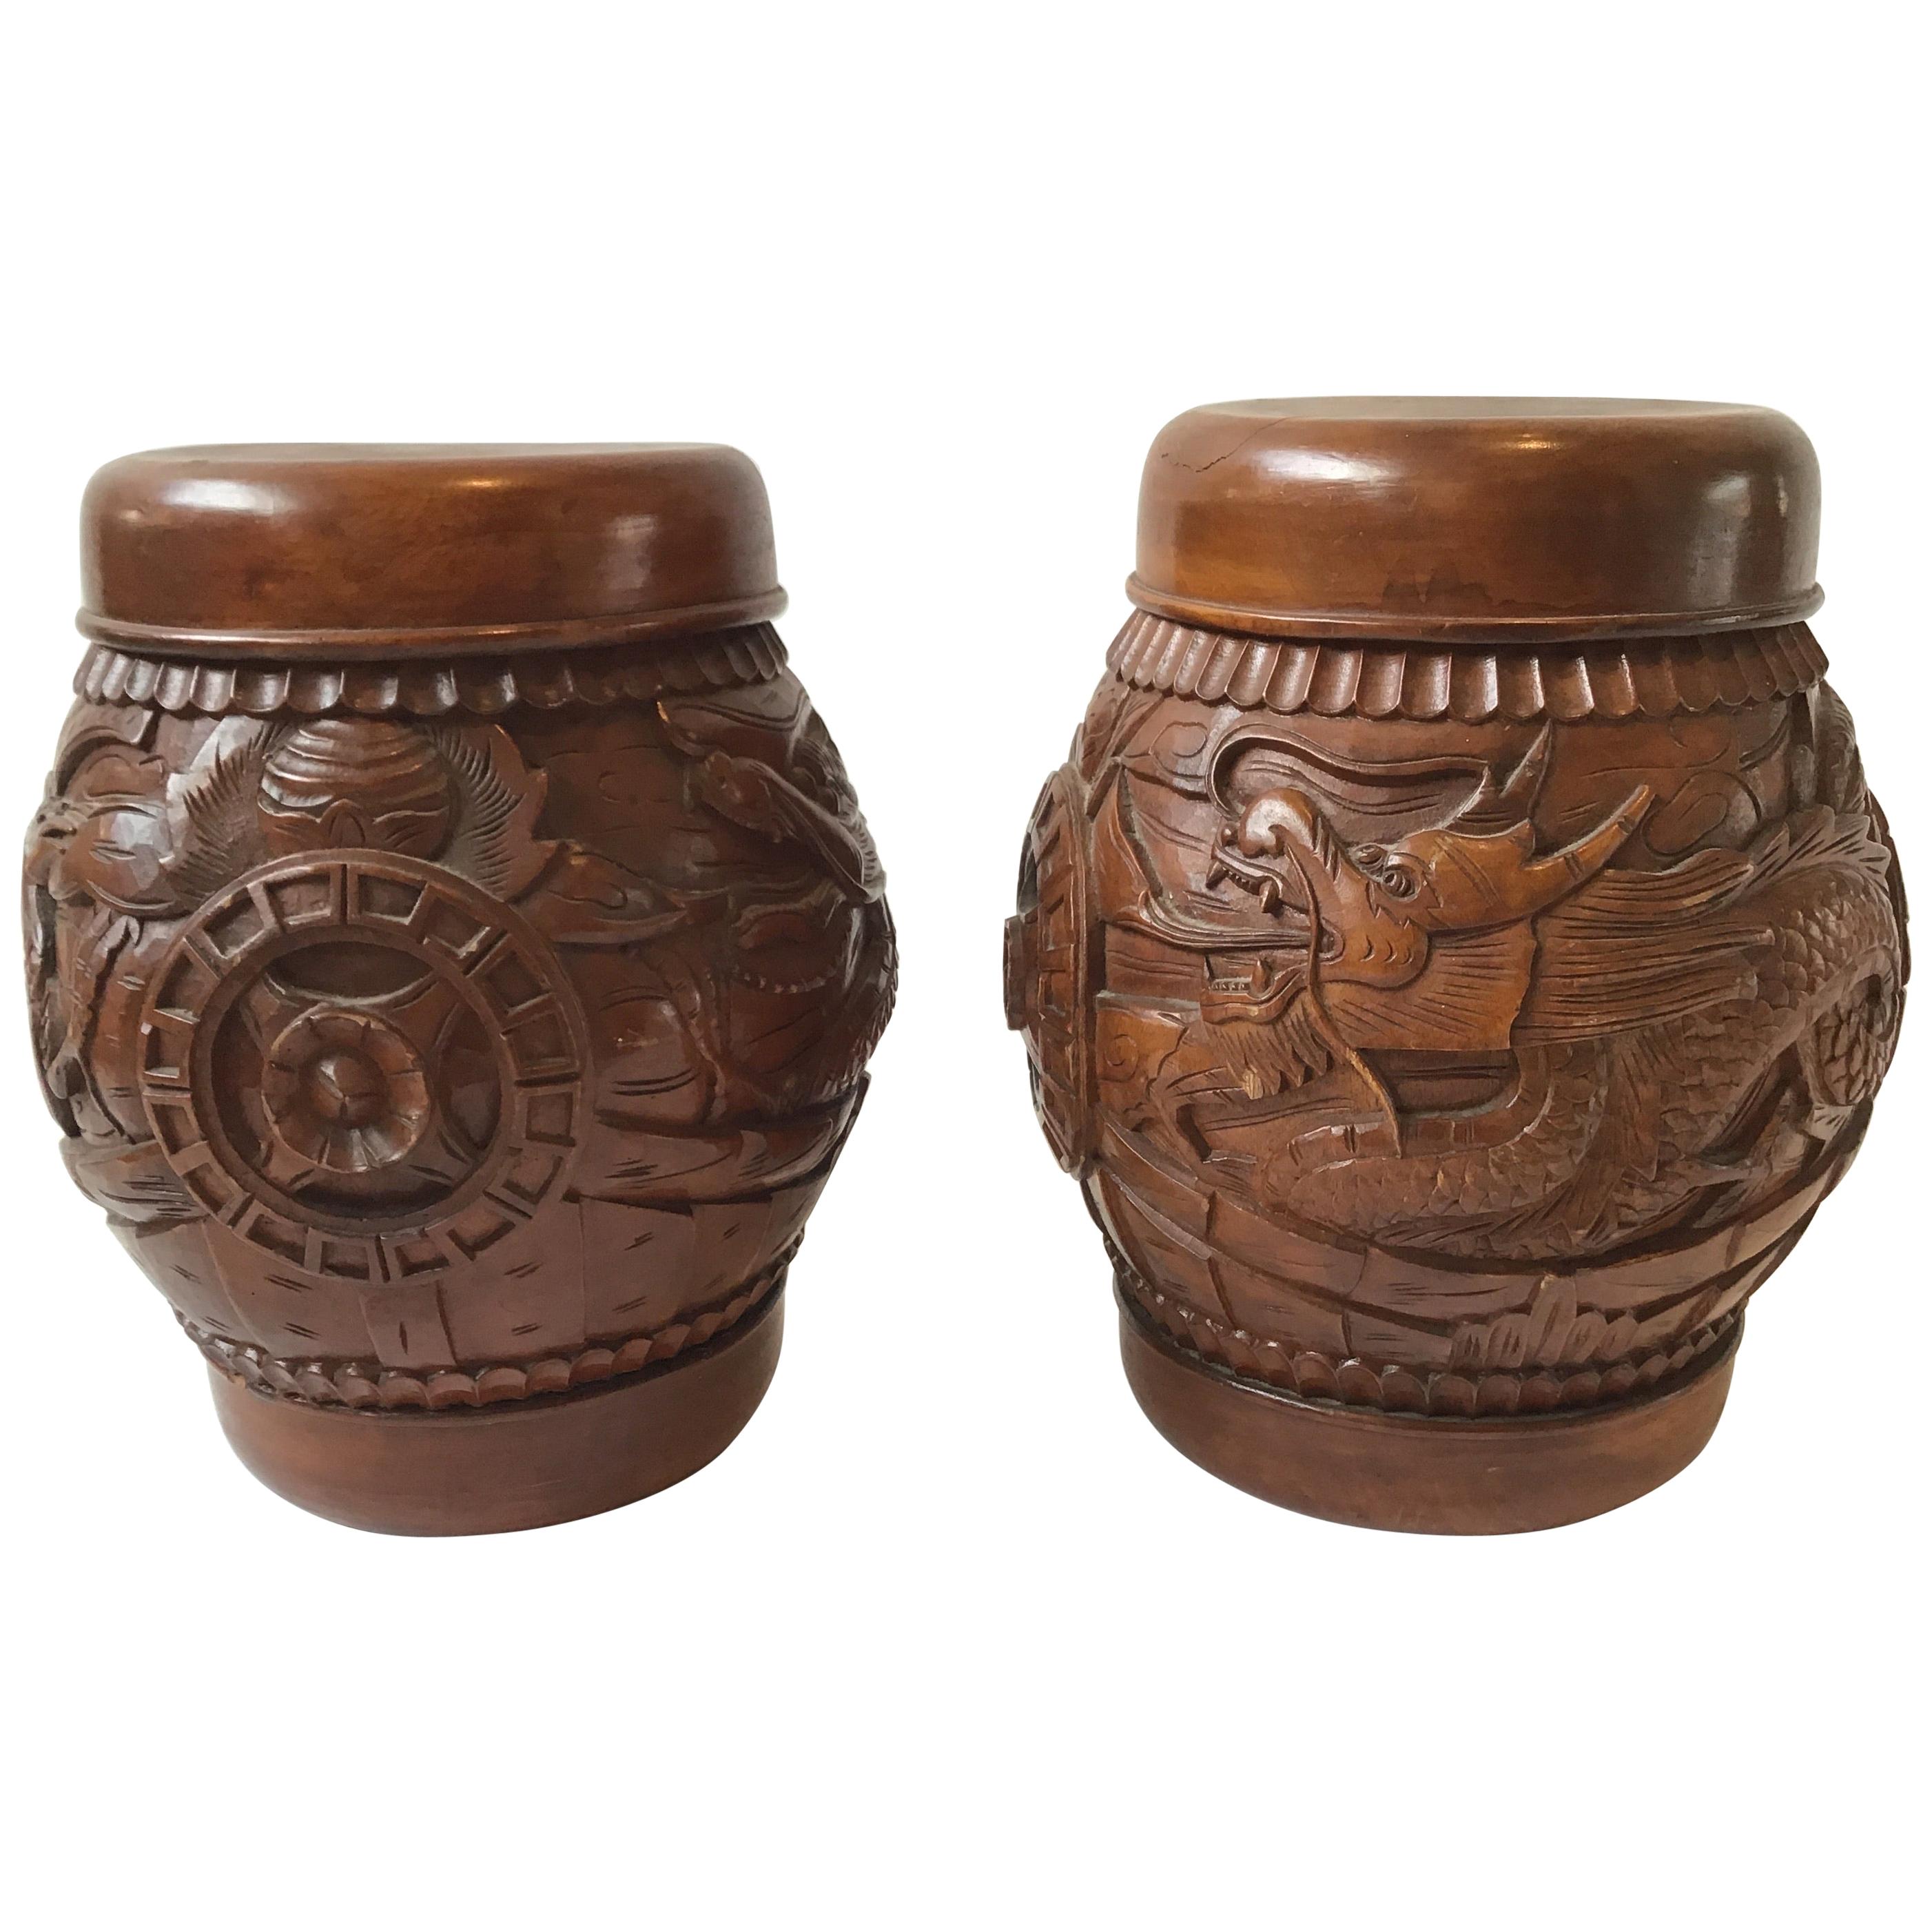 Pair of Carved Wood Asian Dragon Covered Jars